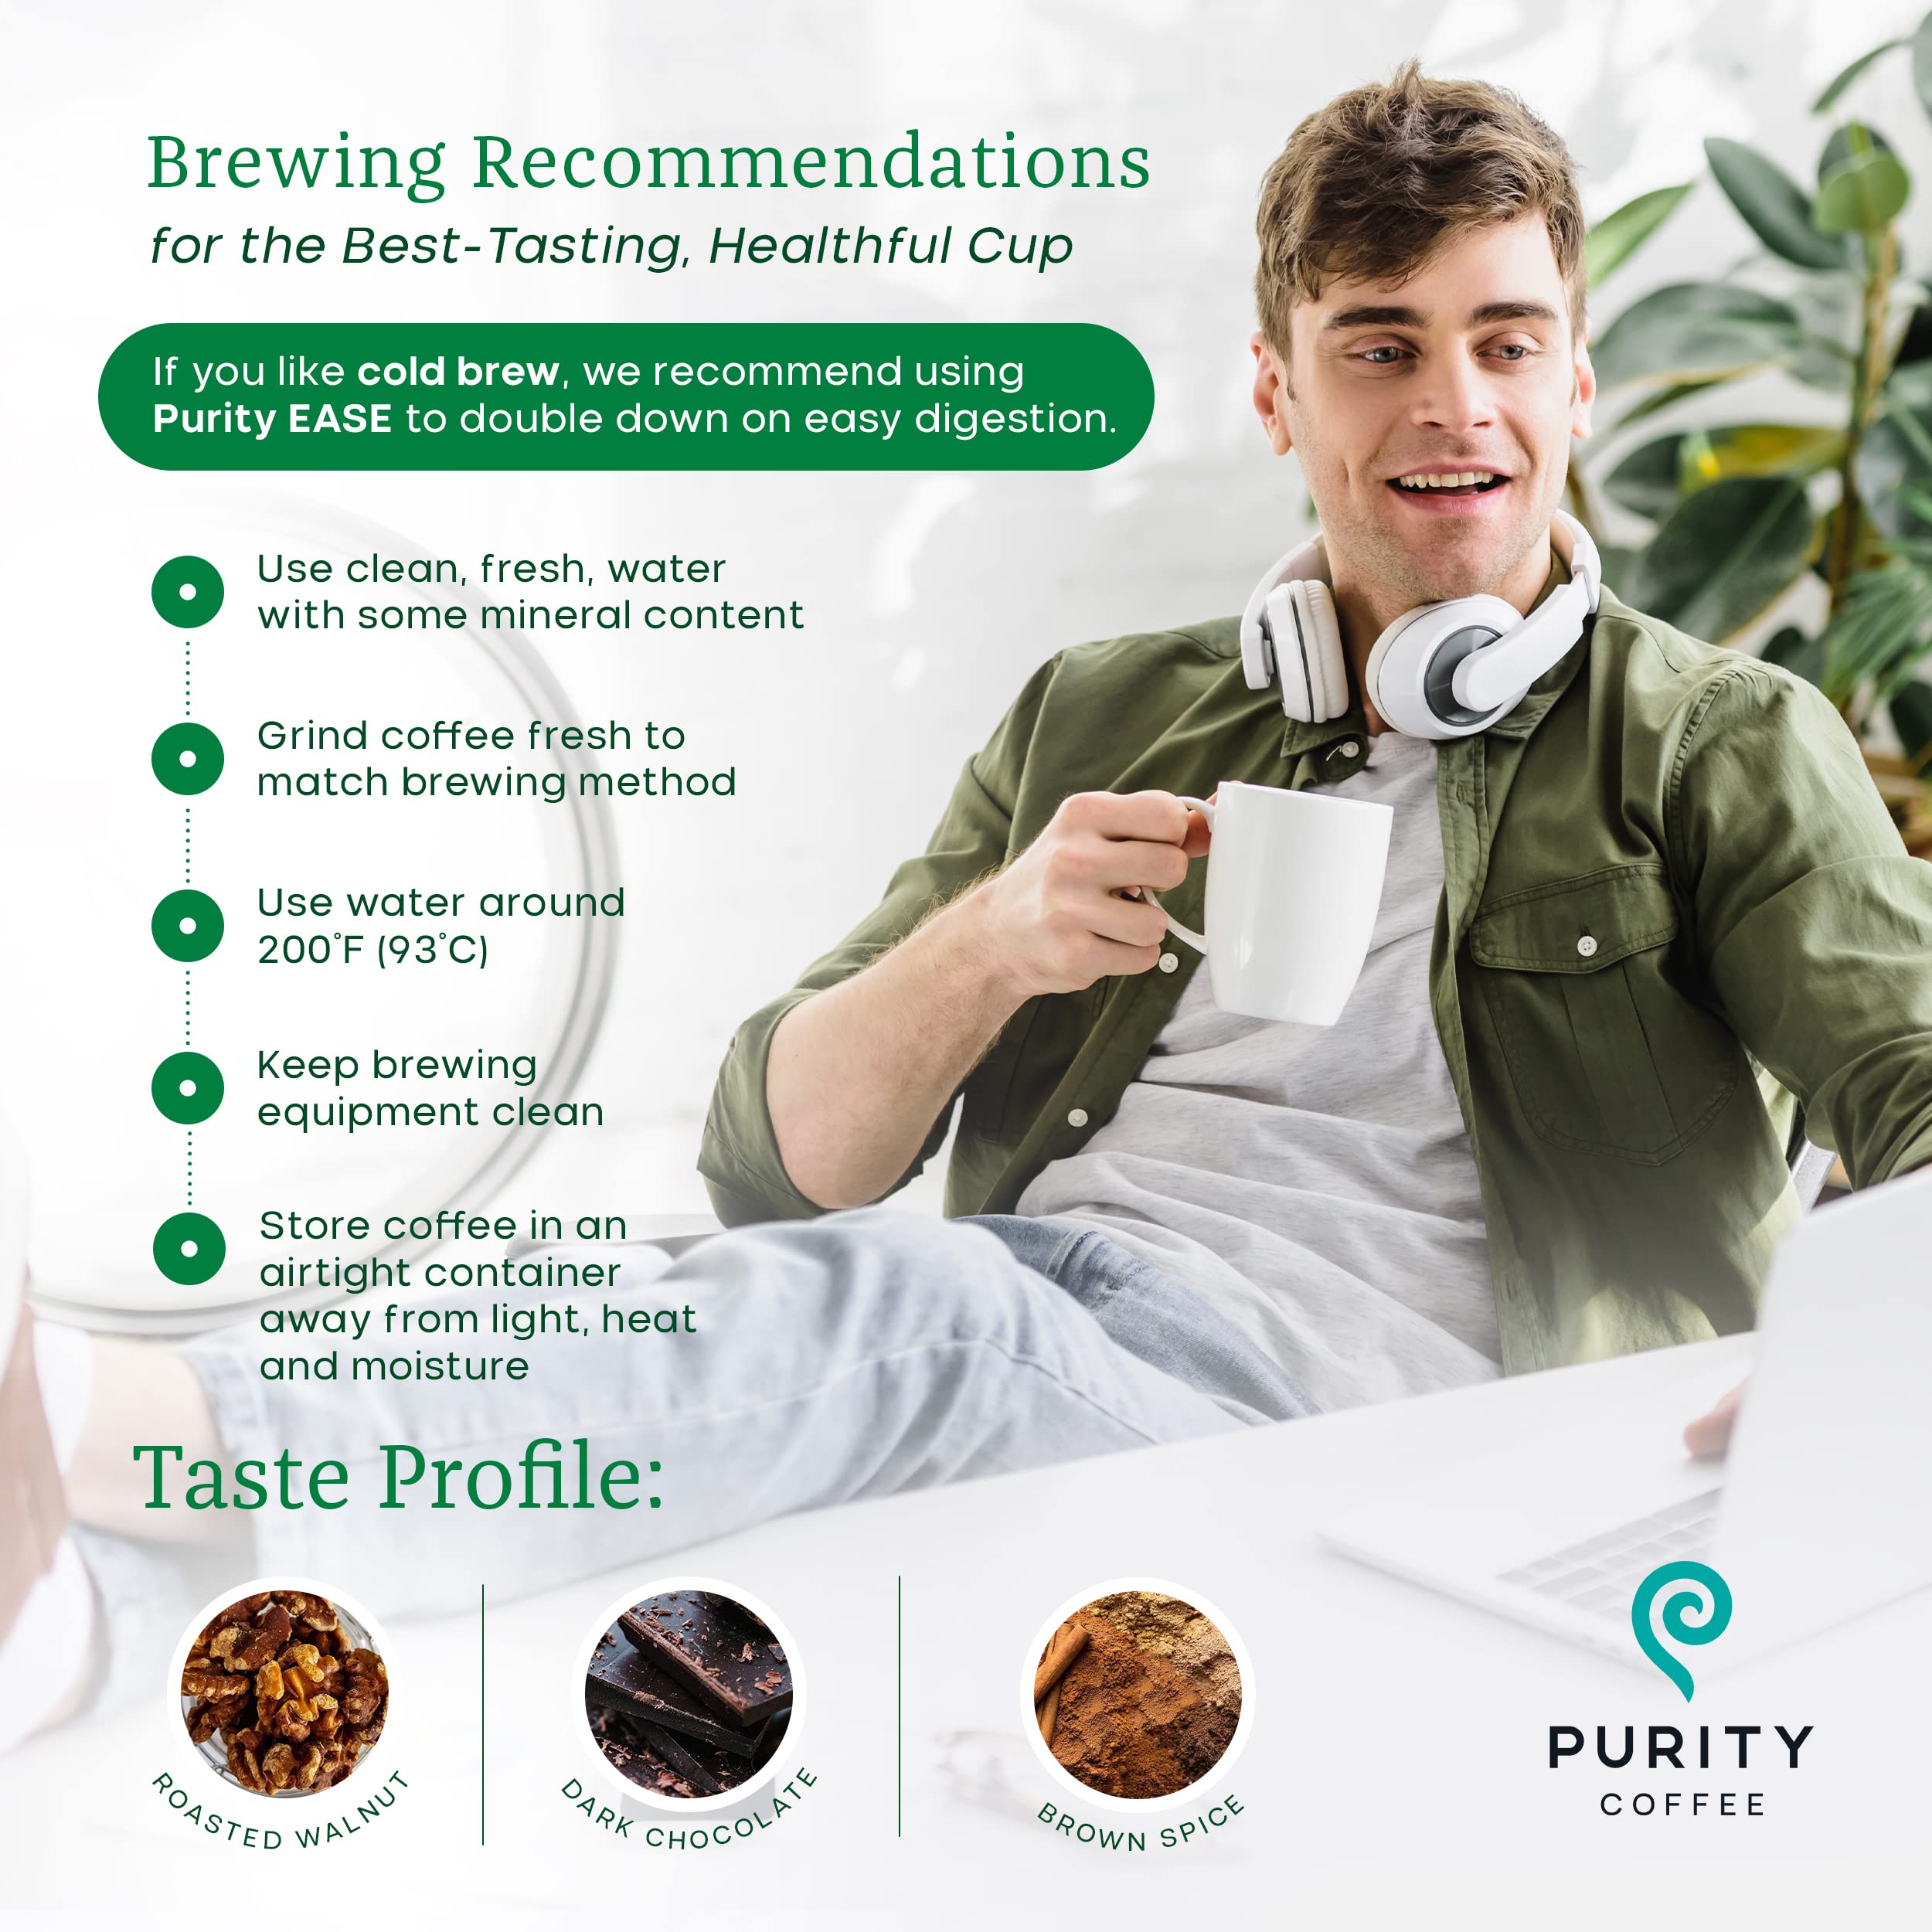 Purity Coffee EASE Dark Roast Low Acid Organic Coffee - USDA Certified Organic Specialty Grade Arabica Whole Bean Coffee - Third Party Tested for Mold, Mycotoxins and Pesticides - 12 oz Bag